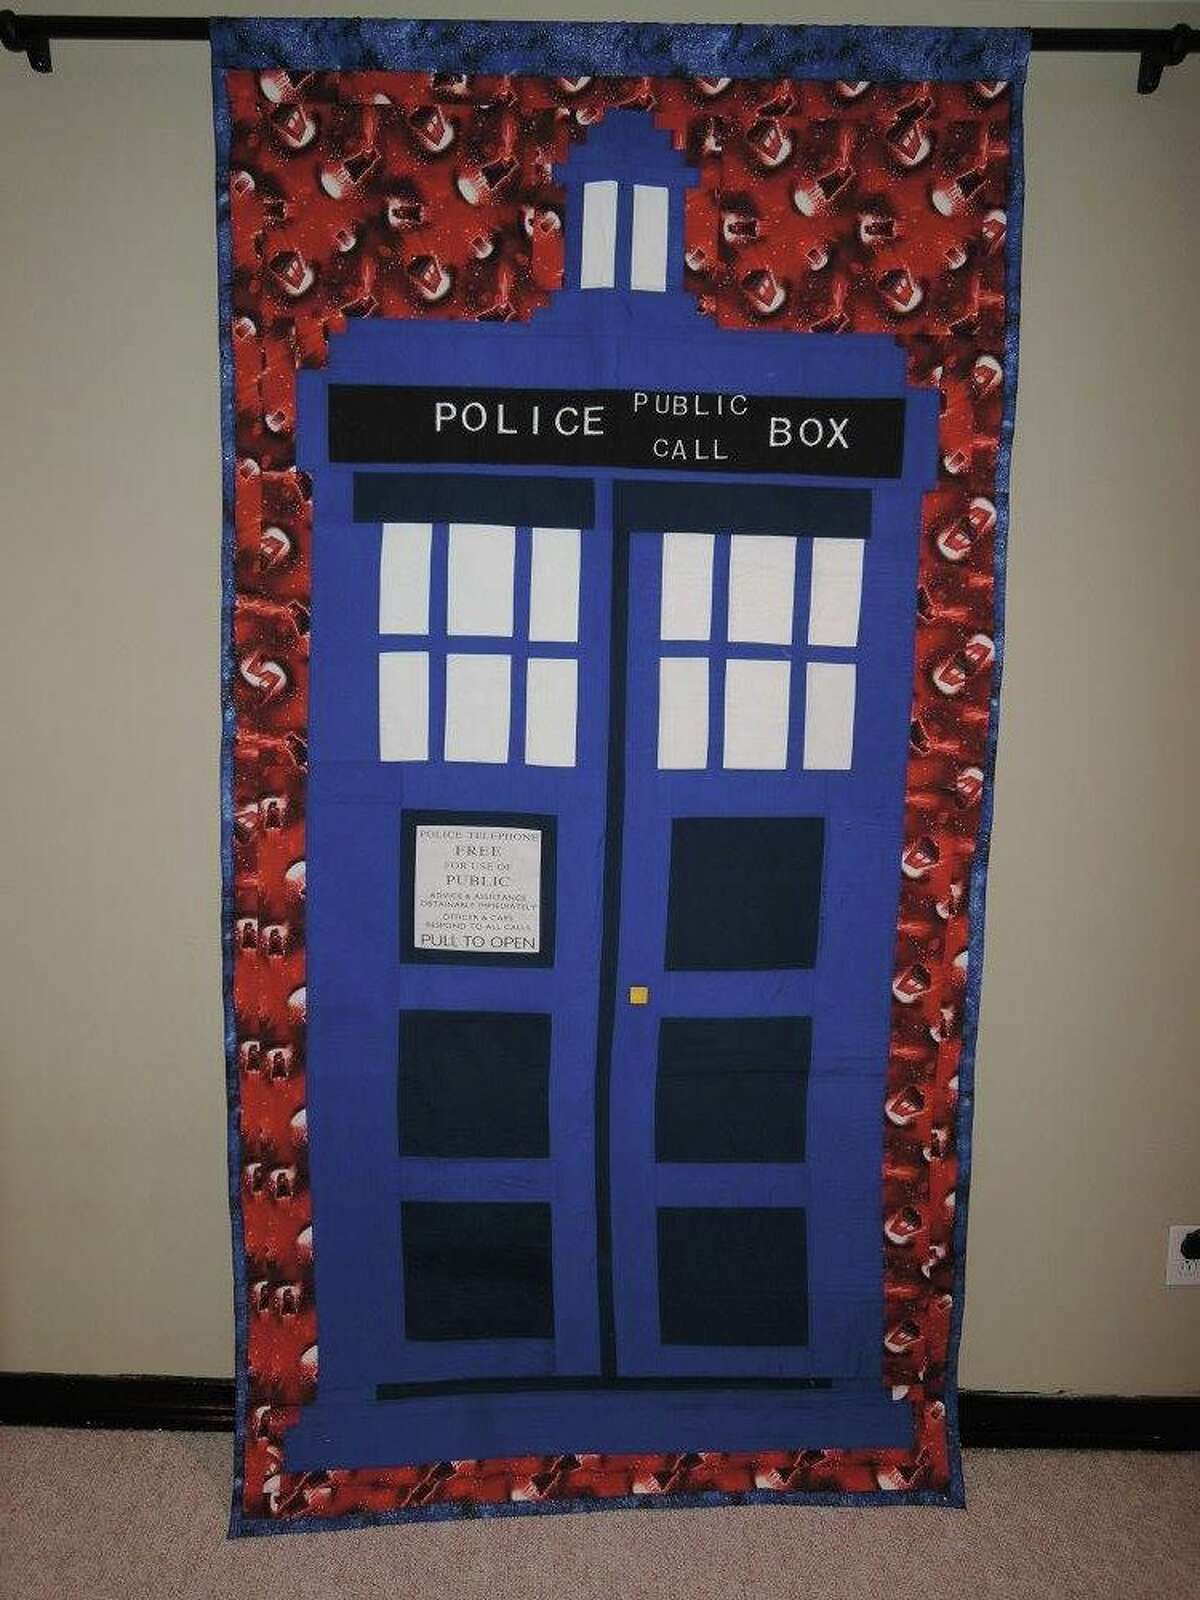 Andi Hamilton is a Houston resident and accountant who spends her spare time making quilts with science fiction and video game motifs including images from Doctor Who, Star Wars, Ghostbusters, Super Mario and more